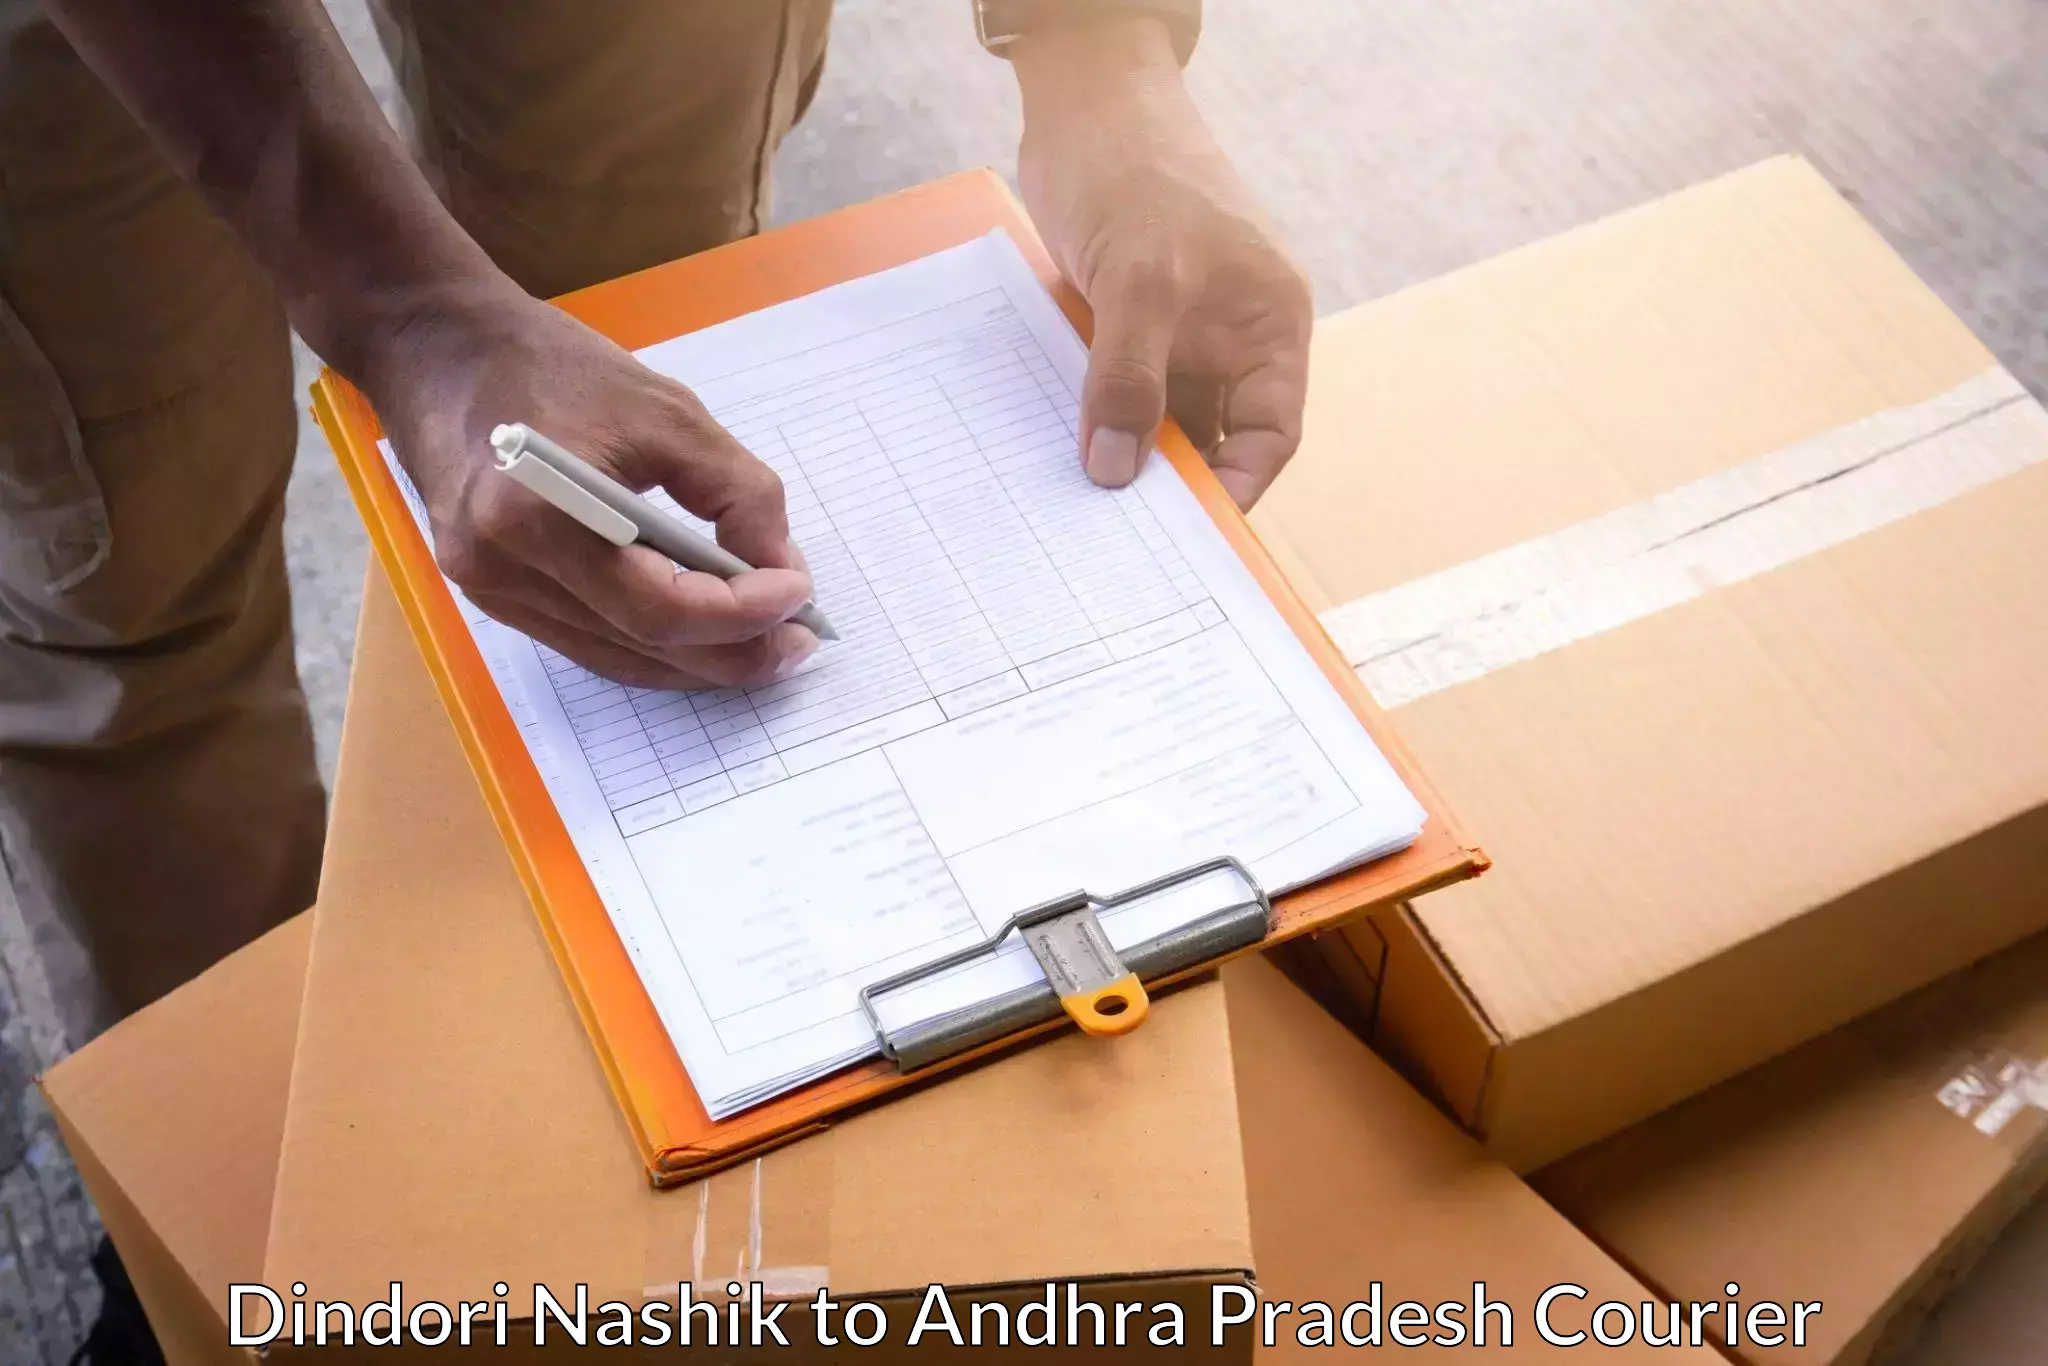 Expedited parcel delivery Dindori Nashik to Challapalli